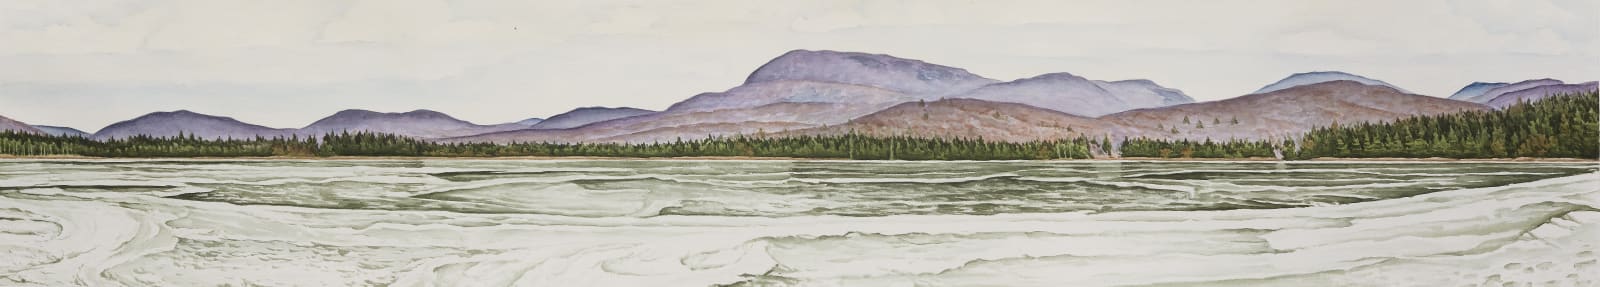 Sean Cavanaugh Atlantic Lace, 2021 Watercolor on paper 22.5 by 30.25 inches